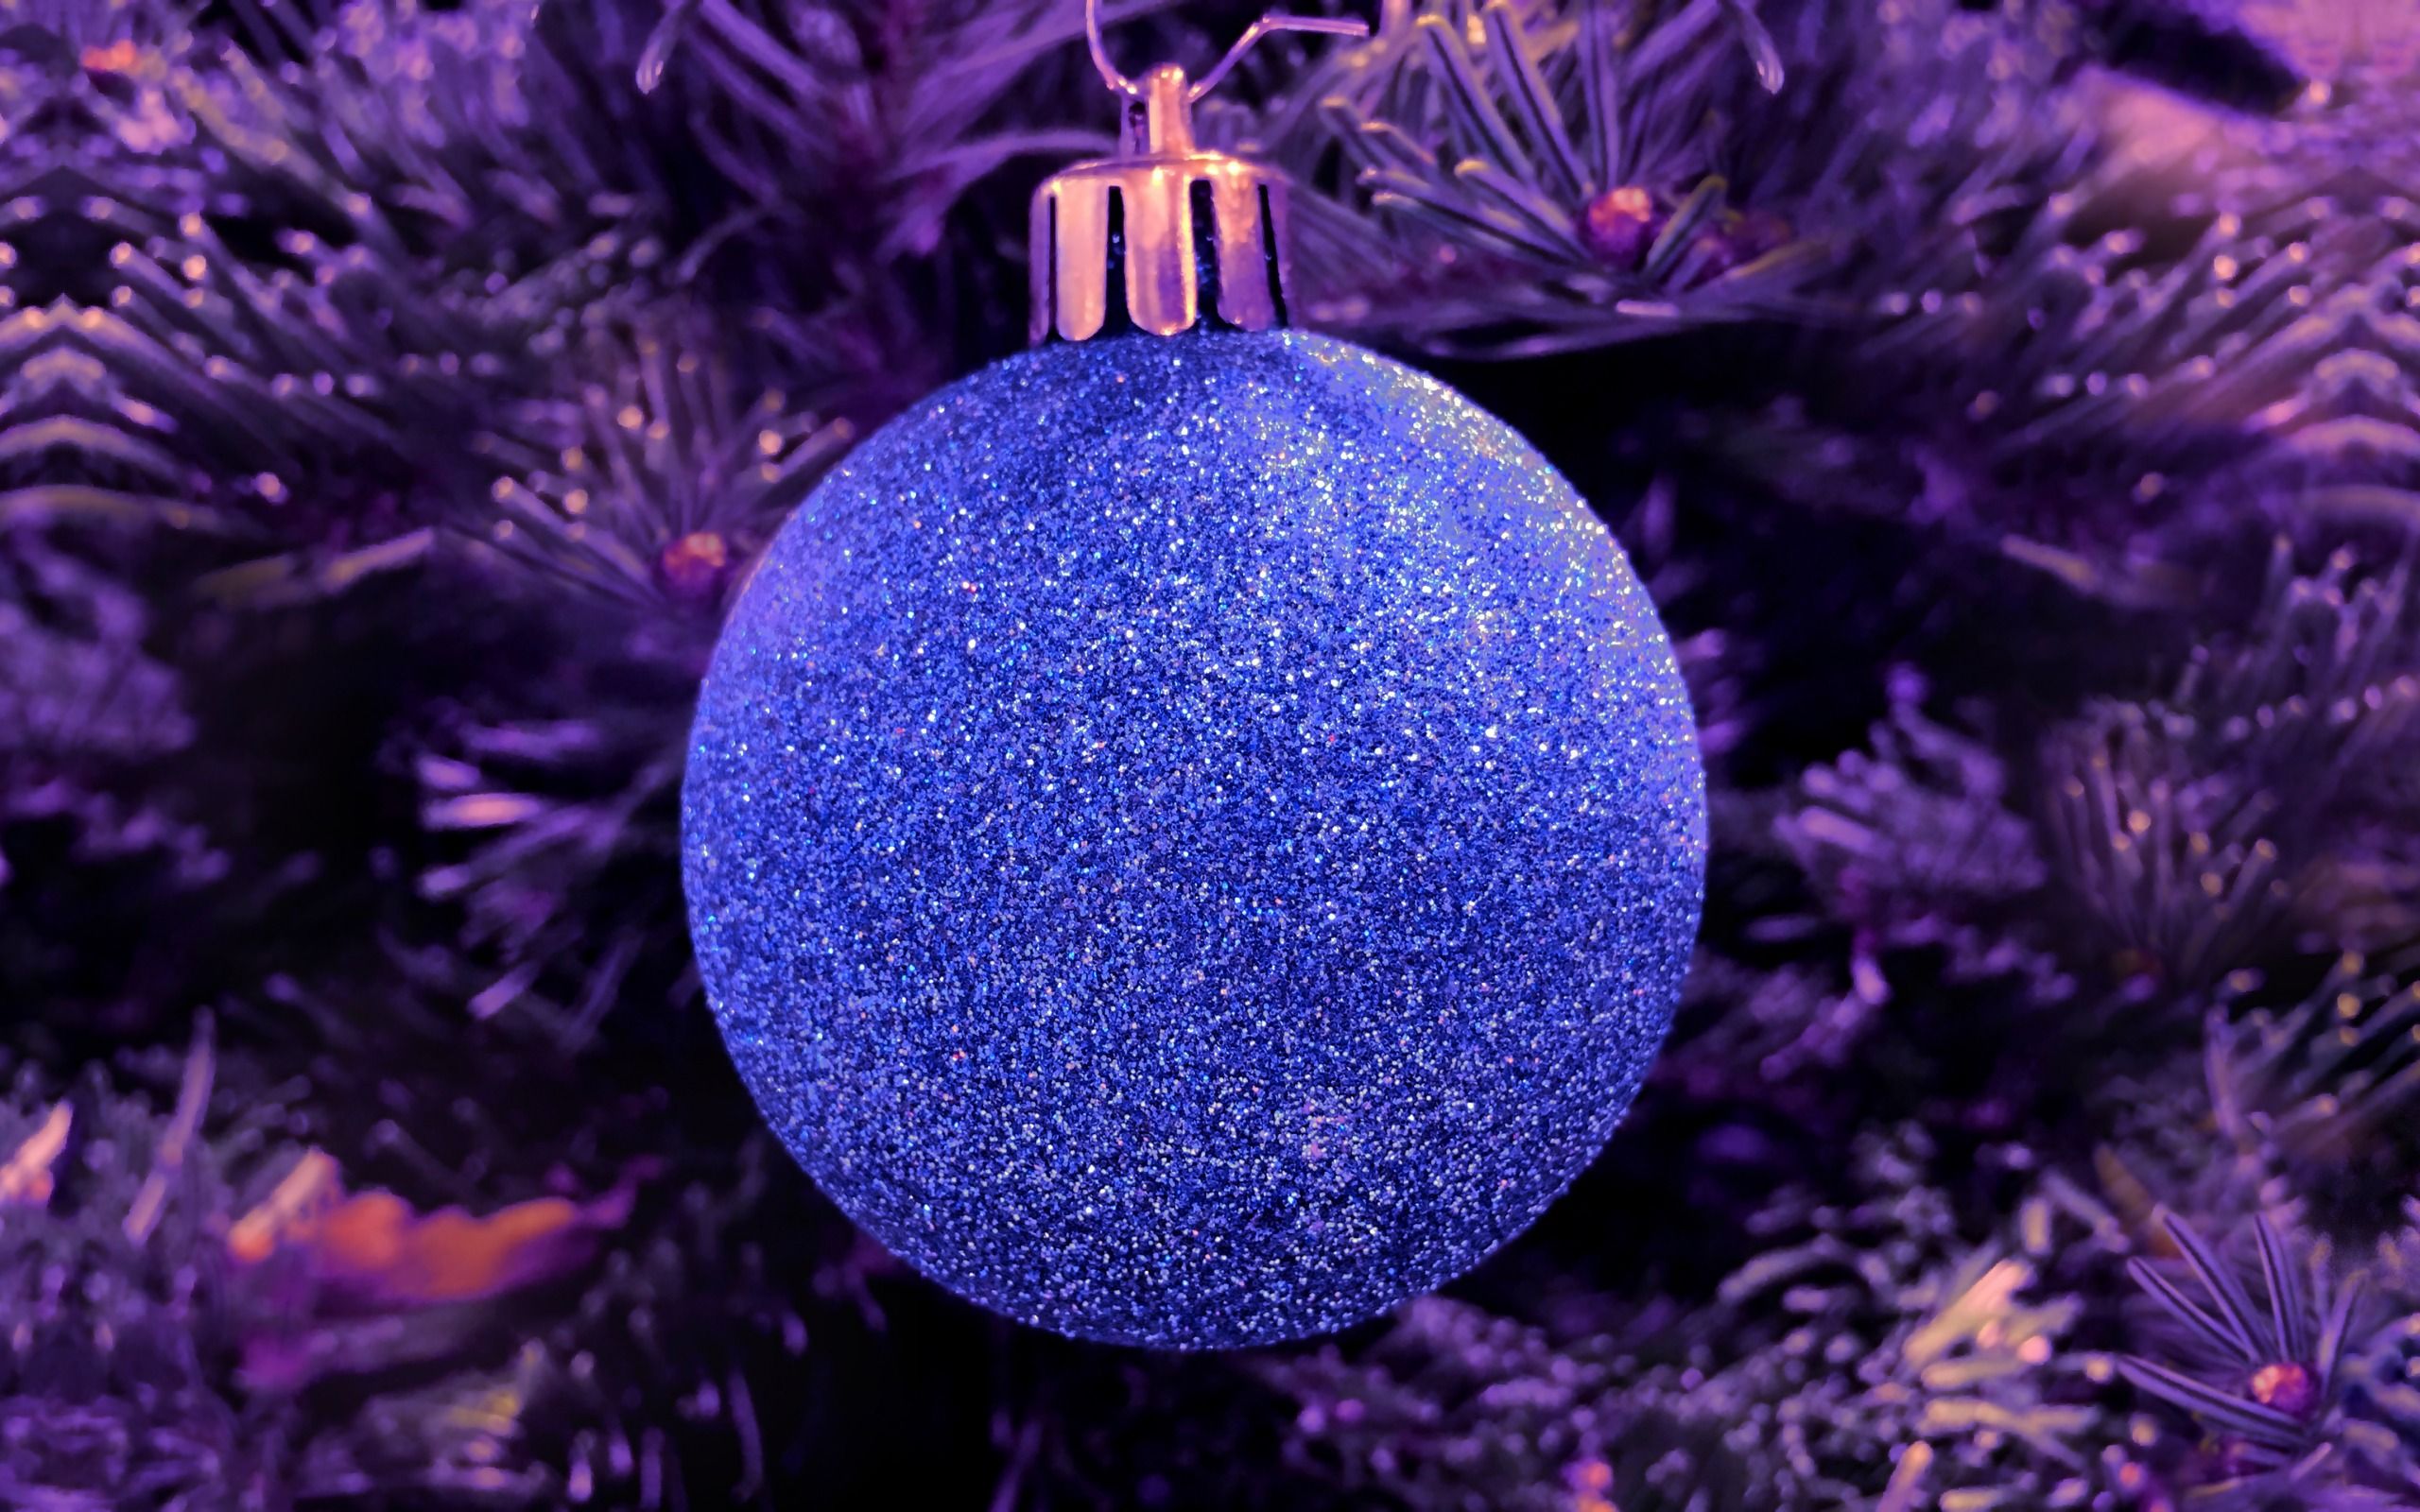 Download wallpaper blue christmas ball, New Year, Christmas, Purple Christmas tree for desktop with resolution 2560x1600. High Quality HD picture wallpaper